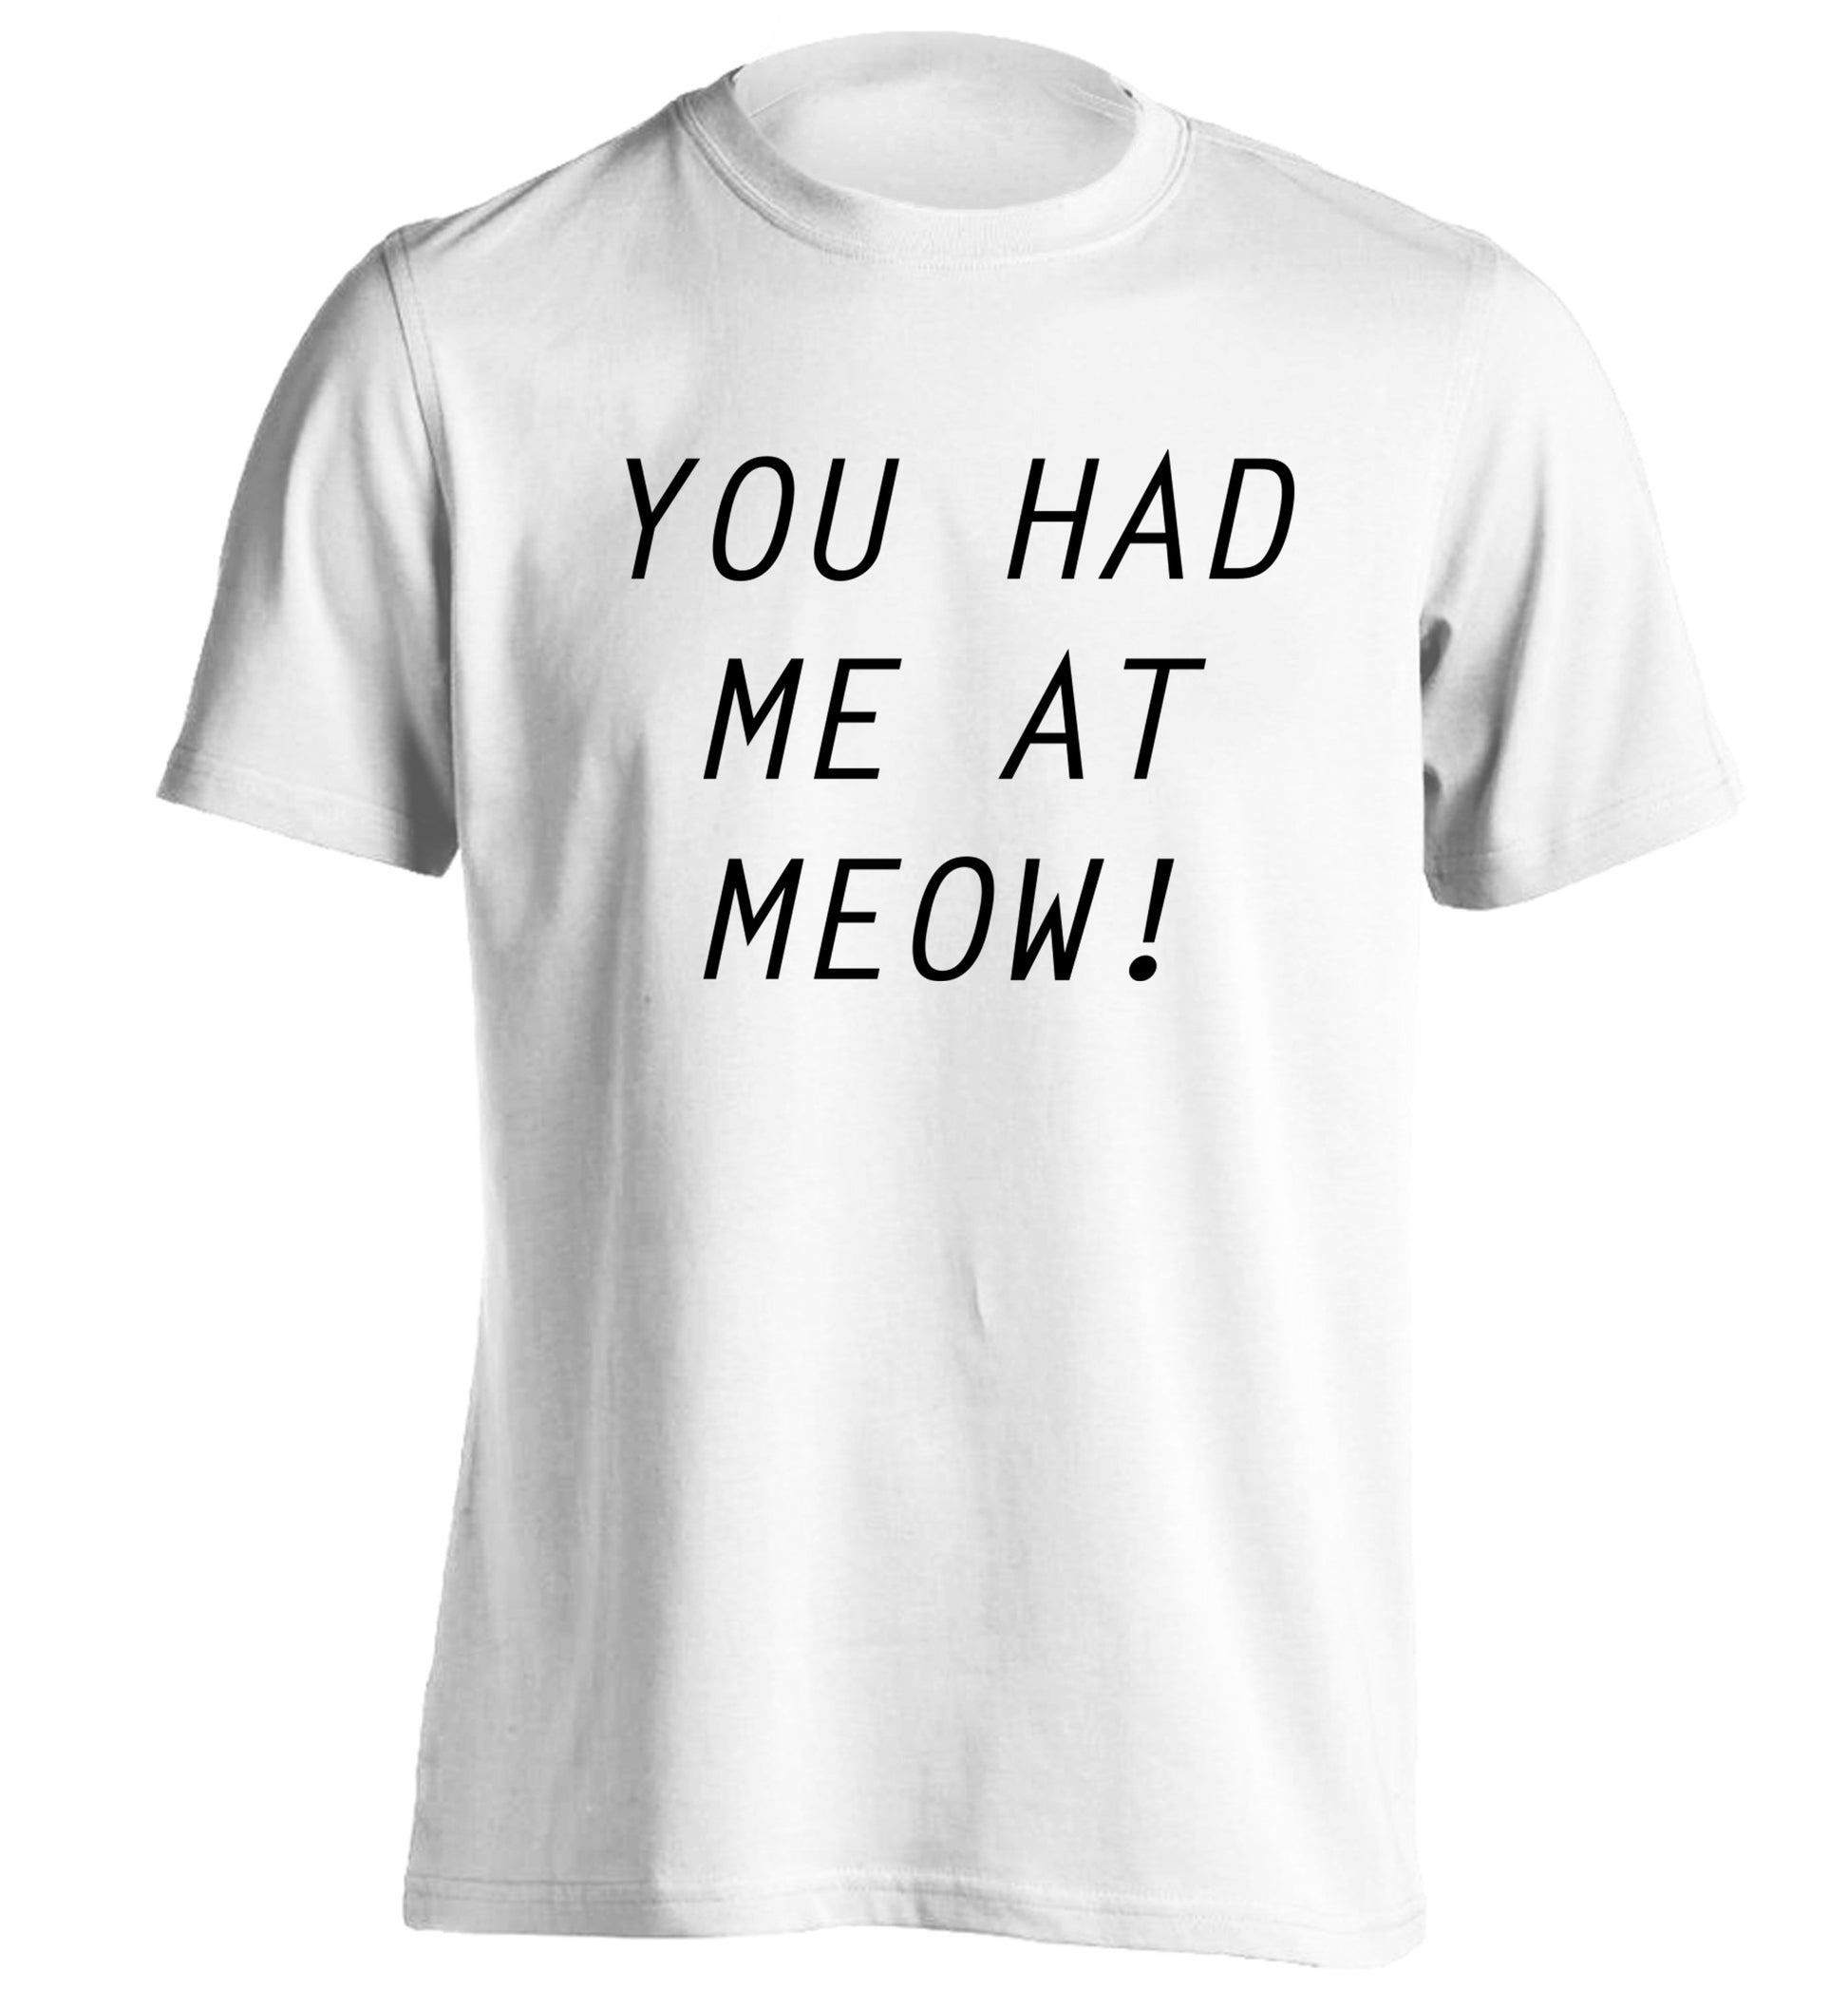 You had me at meow adults unisex white Tshirt 2XL